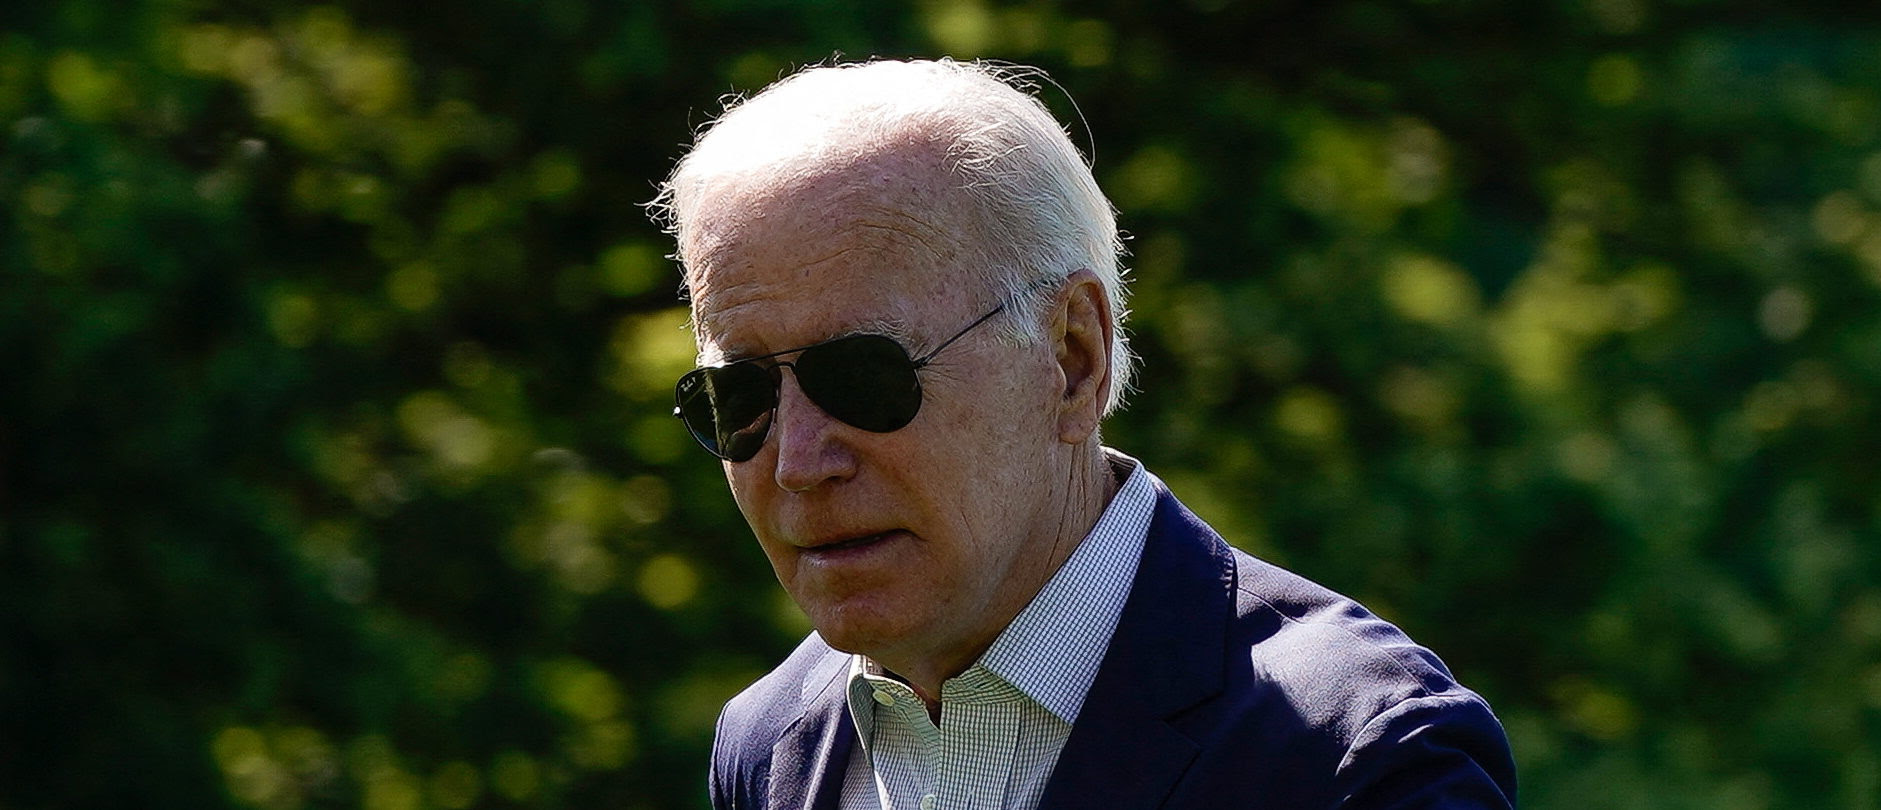 HOSTETTLER: Joe Biden Is Misusing The Defense Production Act To Cover Up His Own Policy Failures